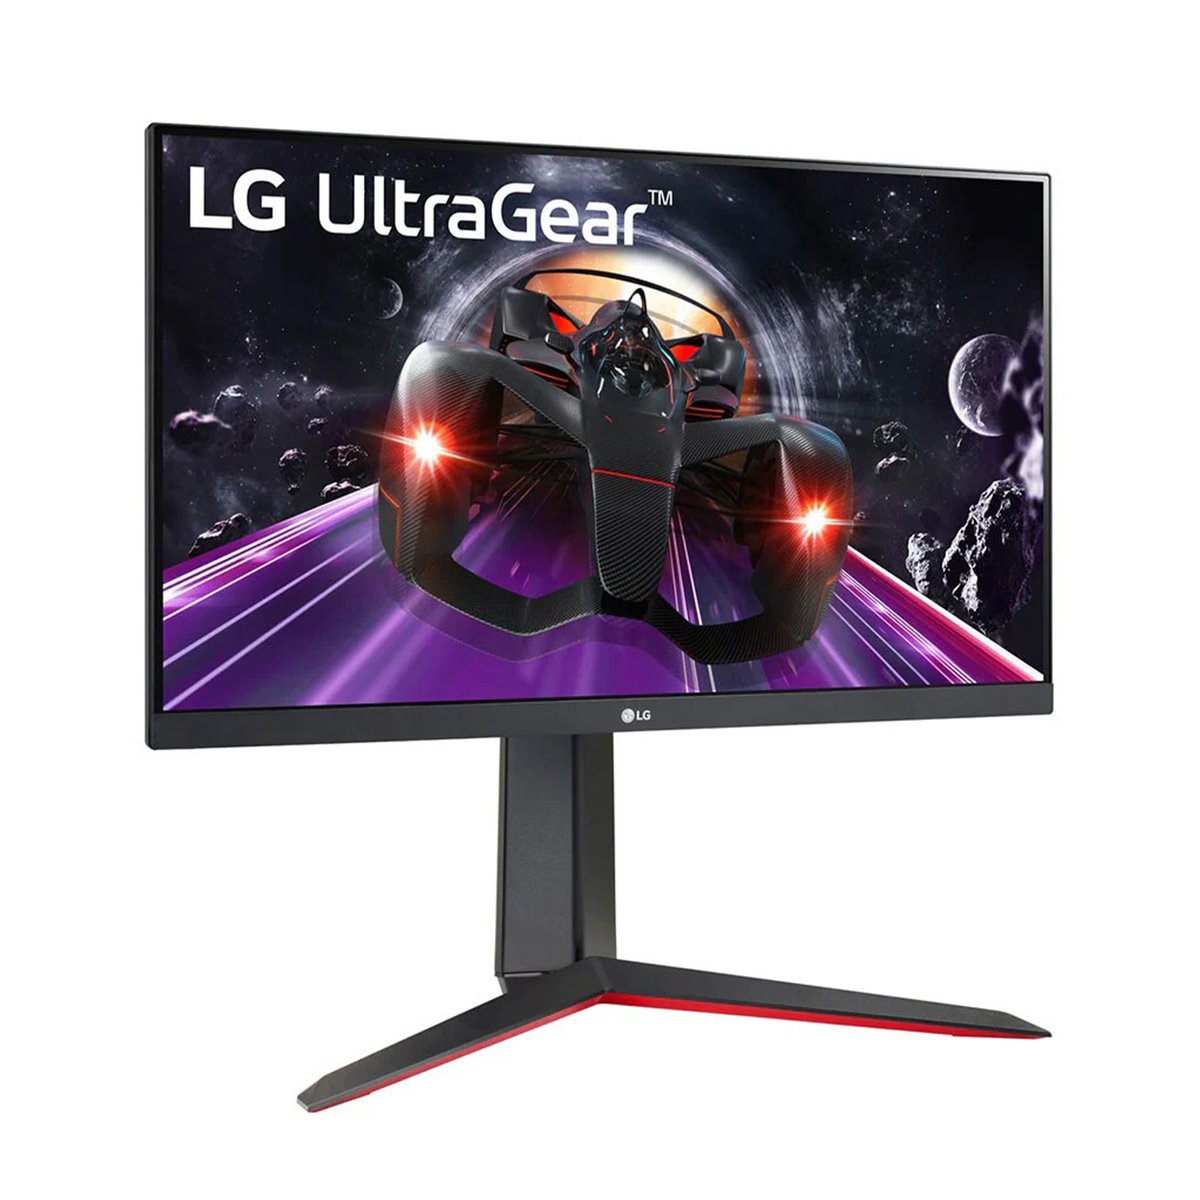 LG 24'' UltraGear FHD IPS 1ms 144Hz HDR Monitor with FreeSync 24GN650